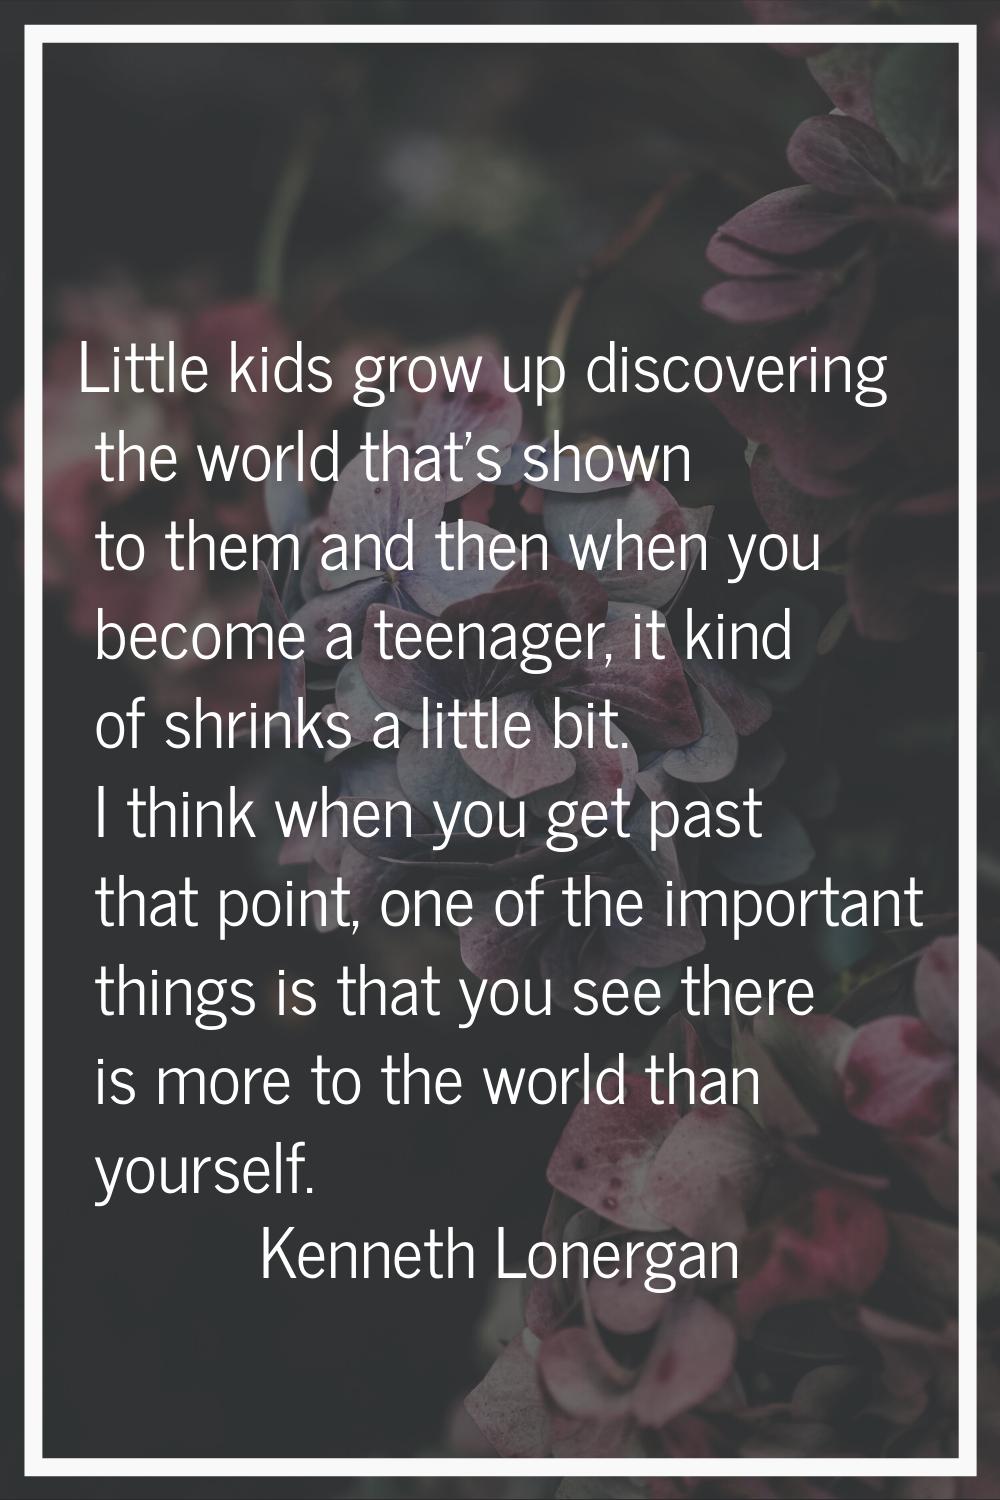 Little kids grow up discovering the world that's shown to them and then when you become a teenager,